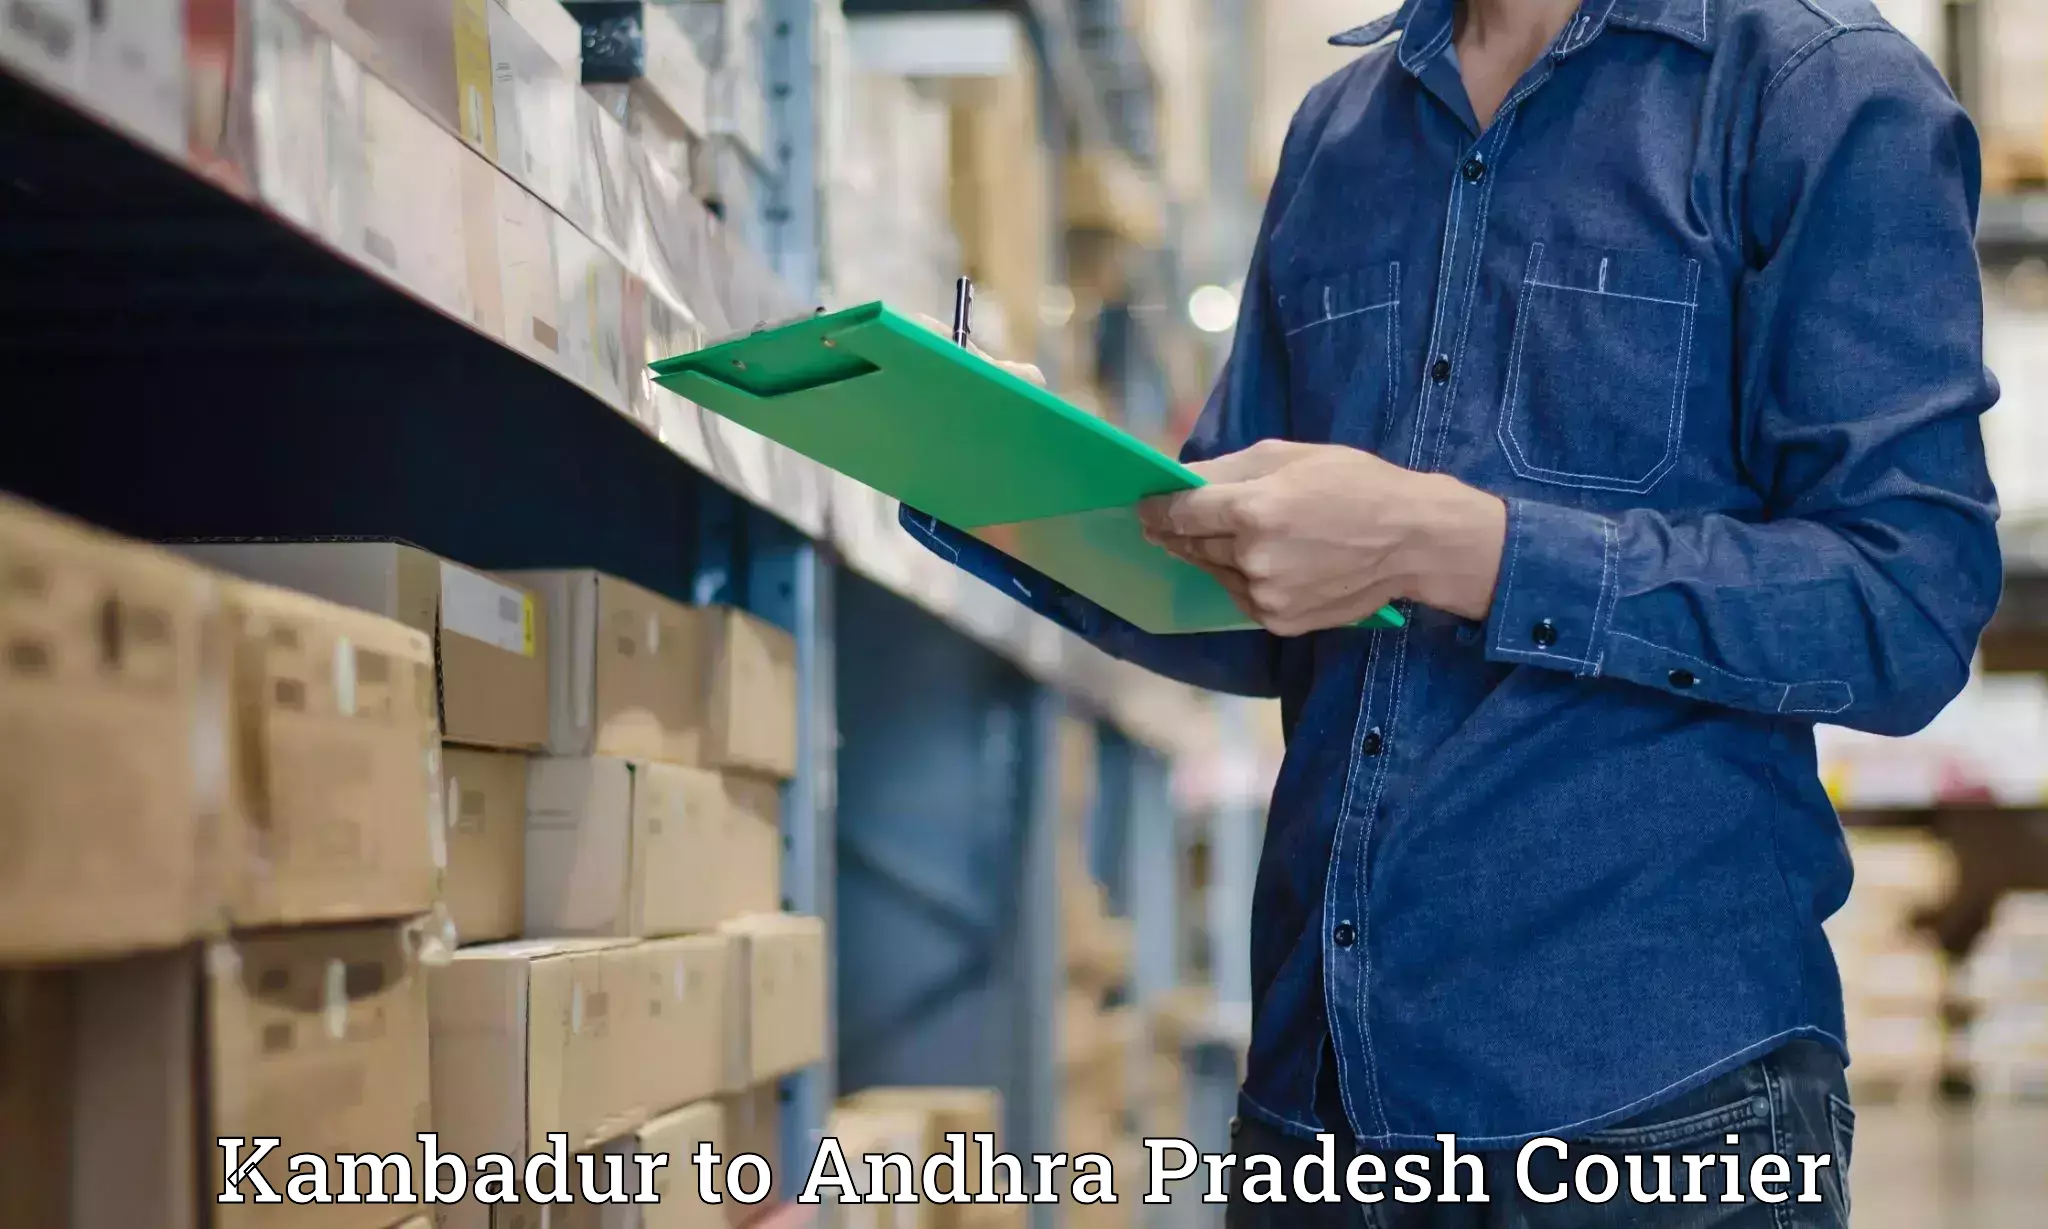 Express delivery solutions Kambadur to Anantapur